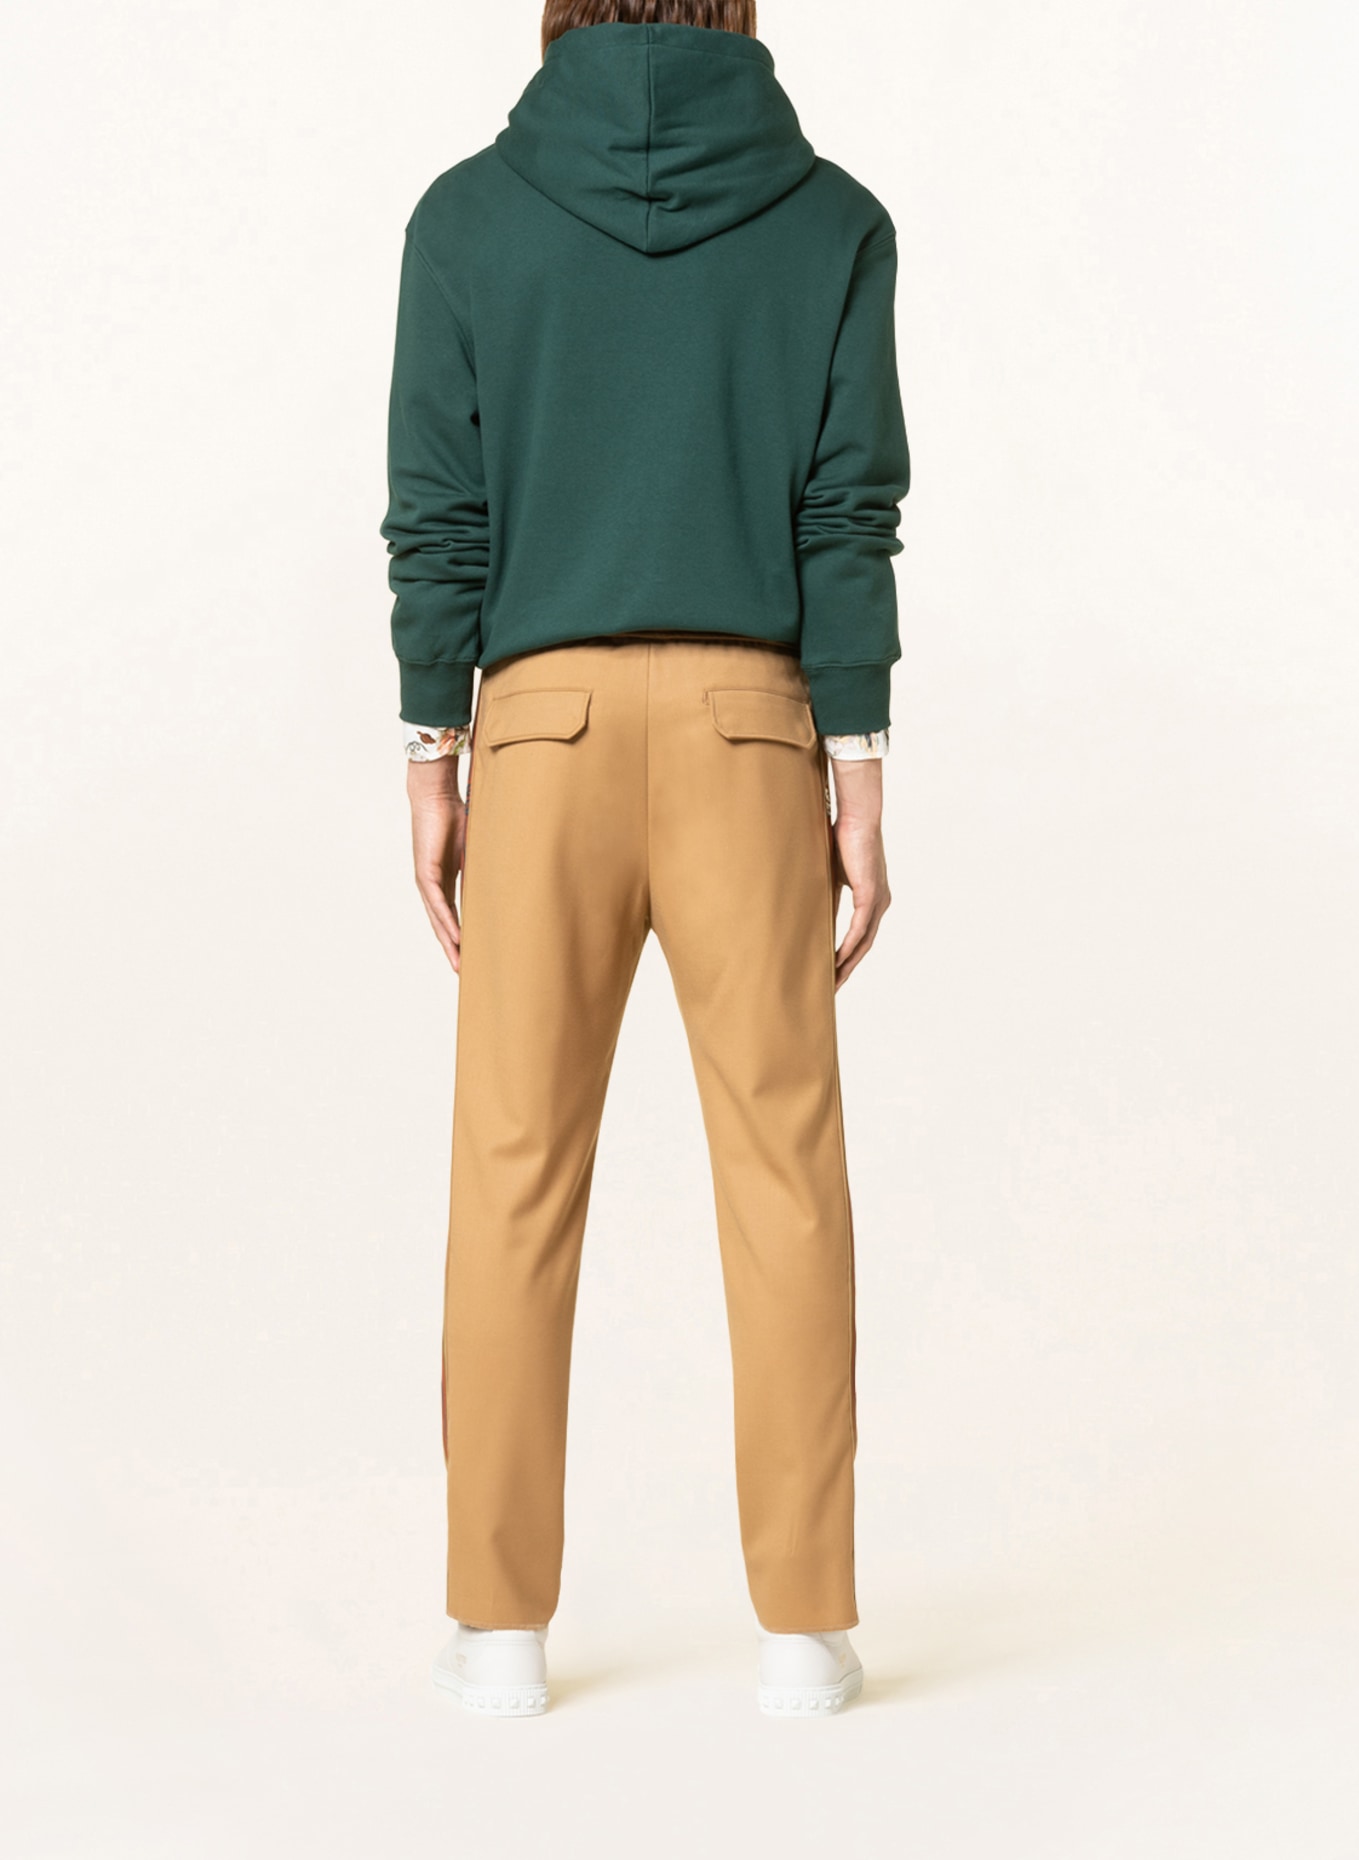 ETRO Pants in jogger style extra slim fit , Color: CAMEL (Image 3)